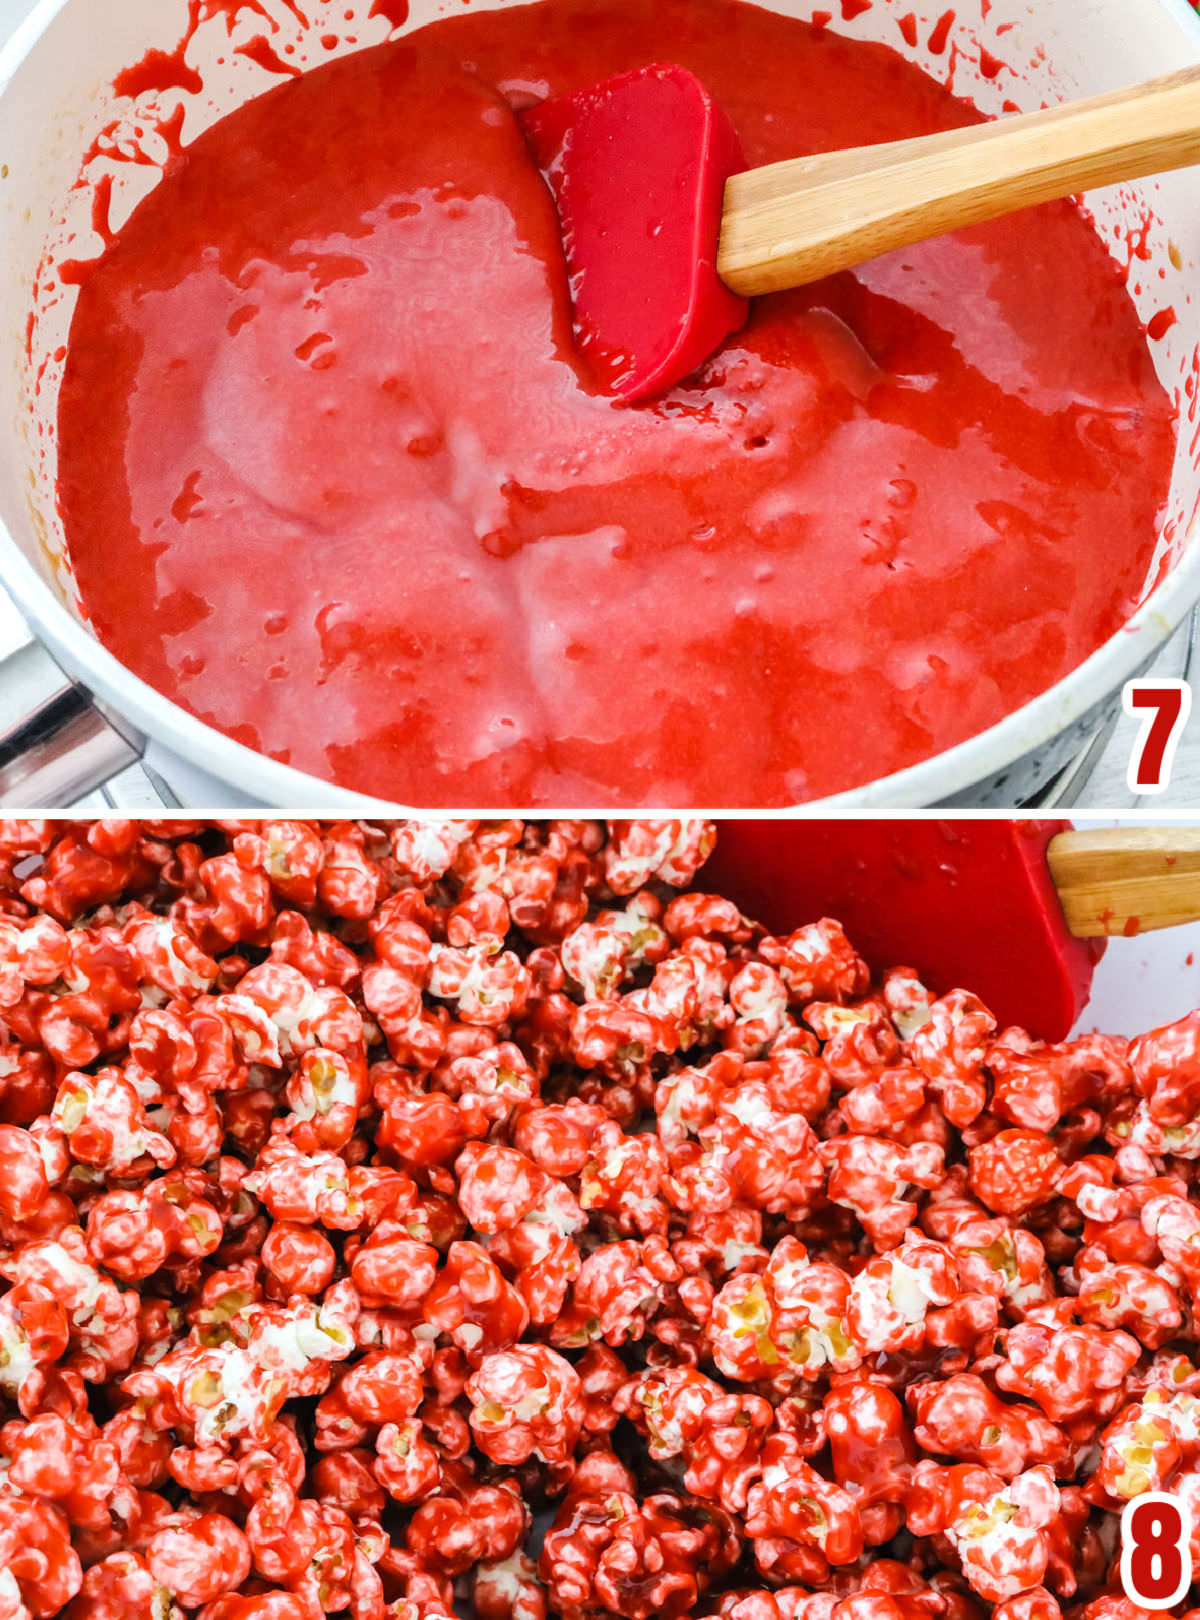 Collage image showing the steps for tinting the caramel mixture red.